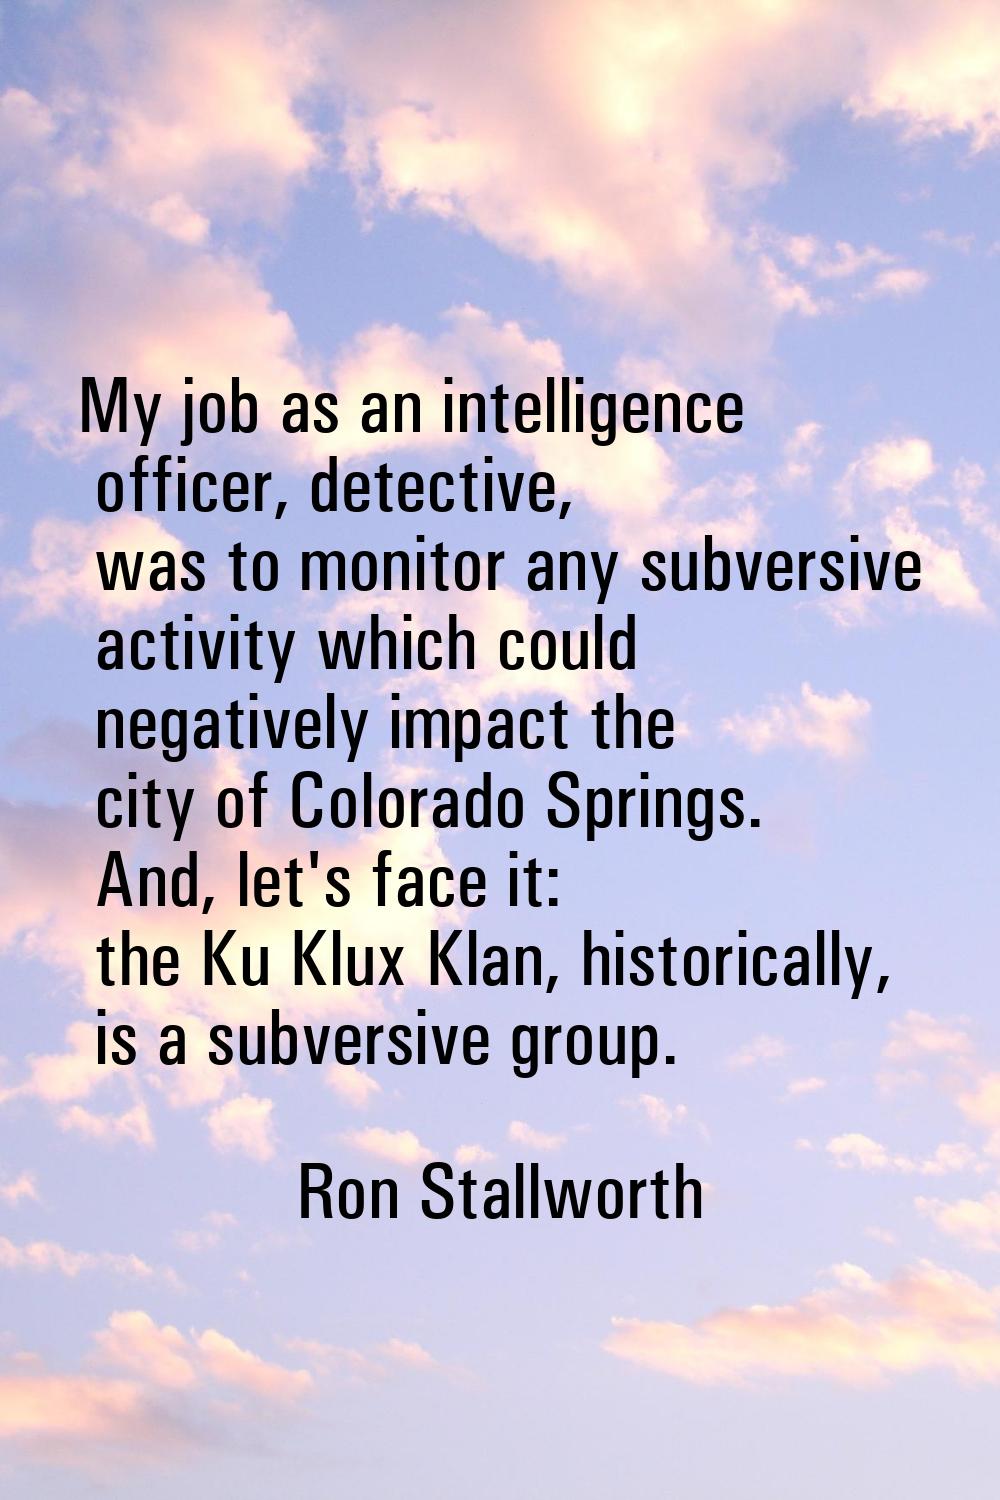 My job as an intelligence officer, detective, was to monitor any subversive activity which could ne